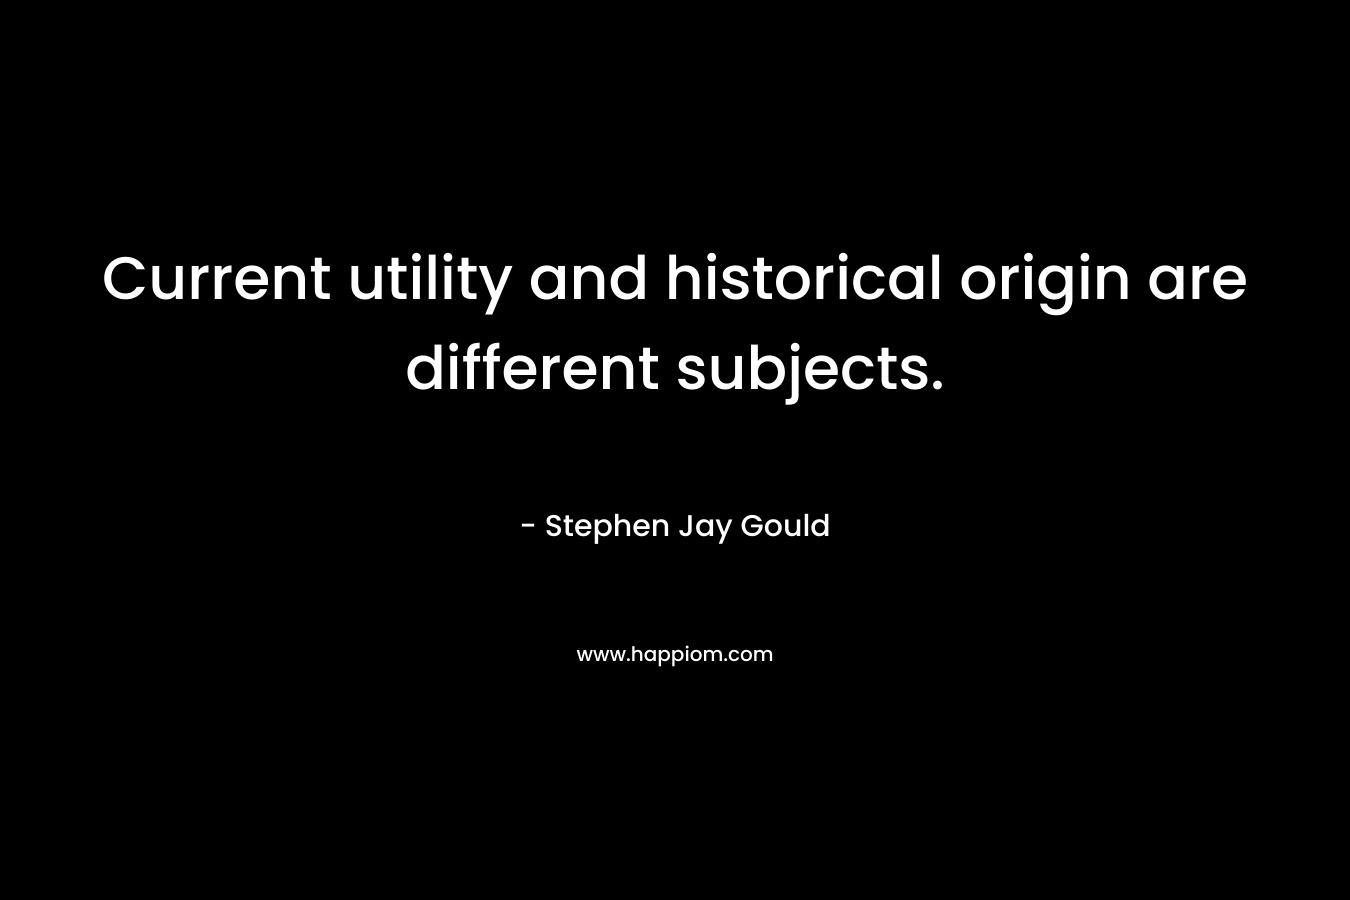 Current utility and historical origin are different subjects.